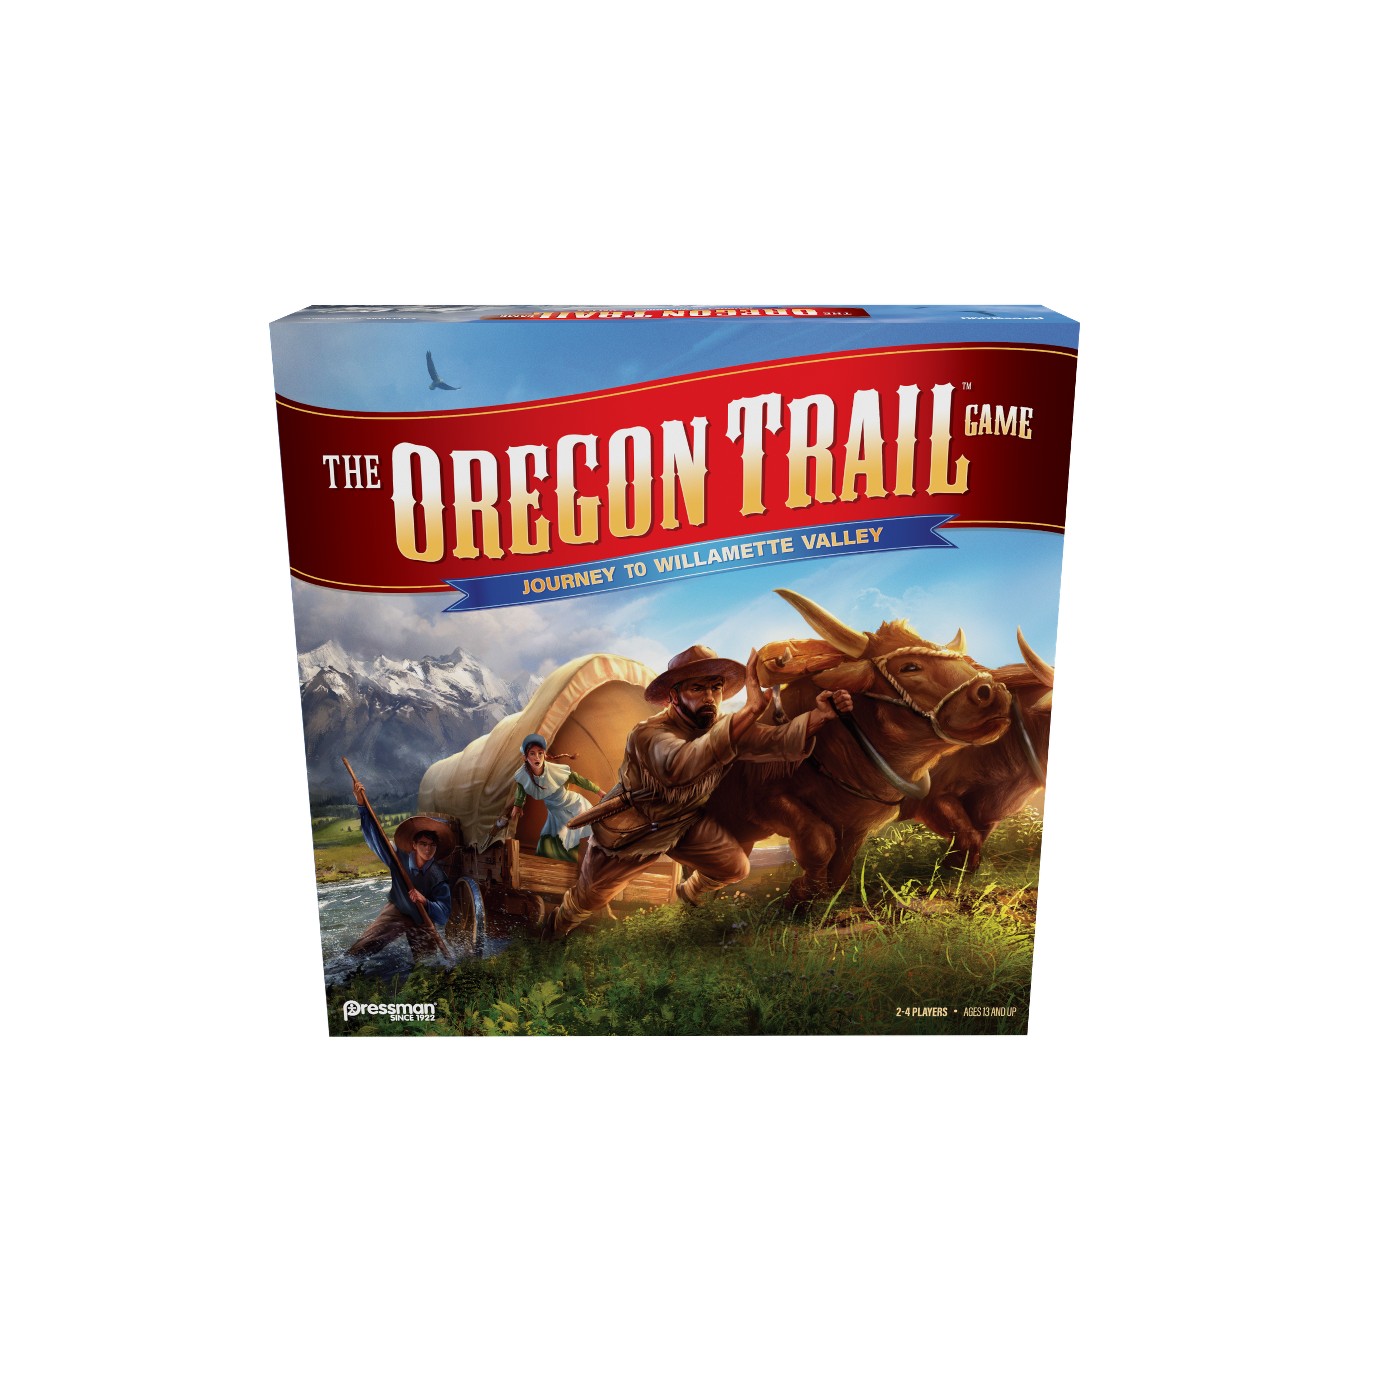 The Oregon Trail: Journey to Willamette Valley Game - image 1 of 3